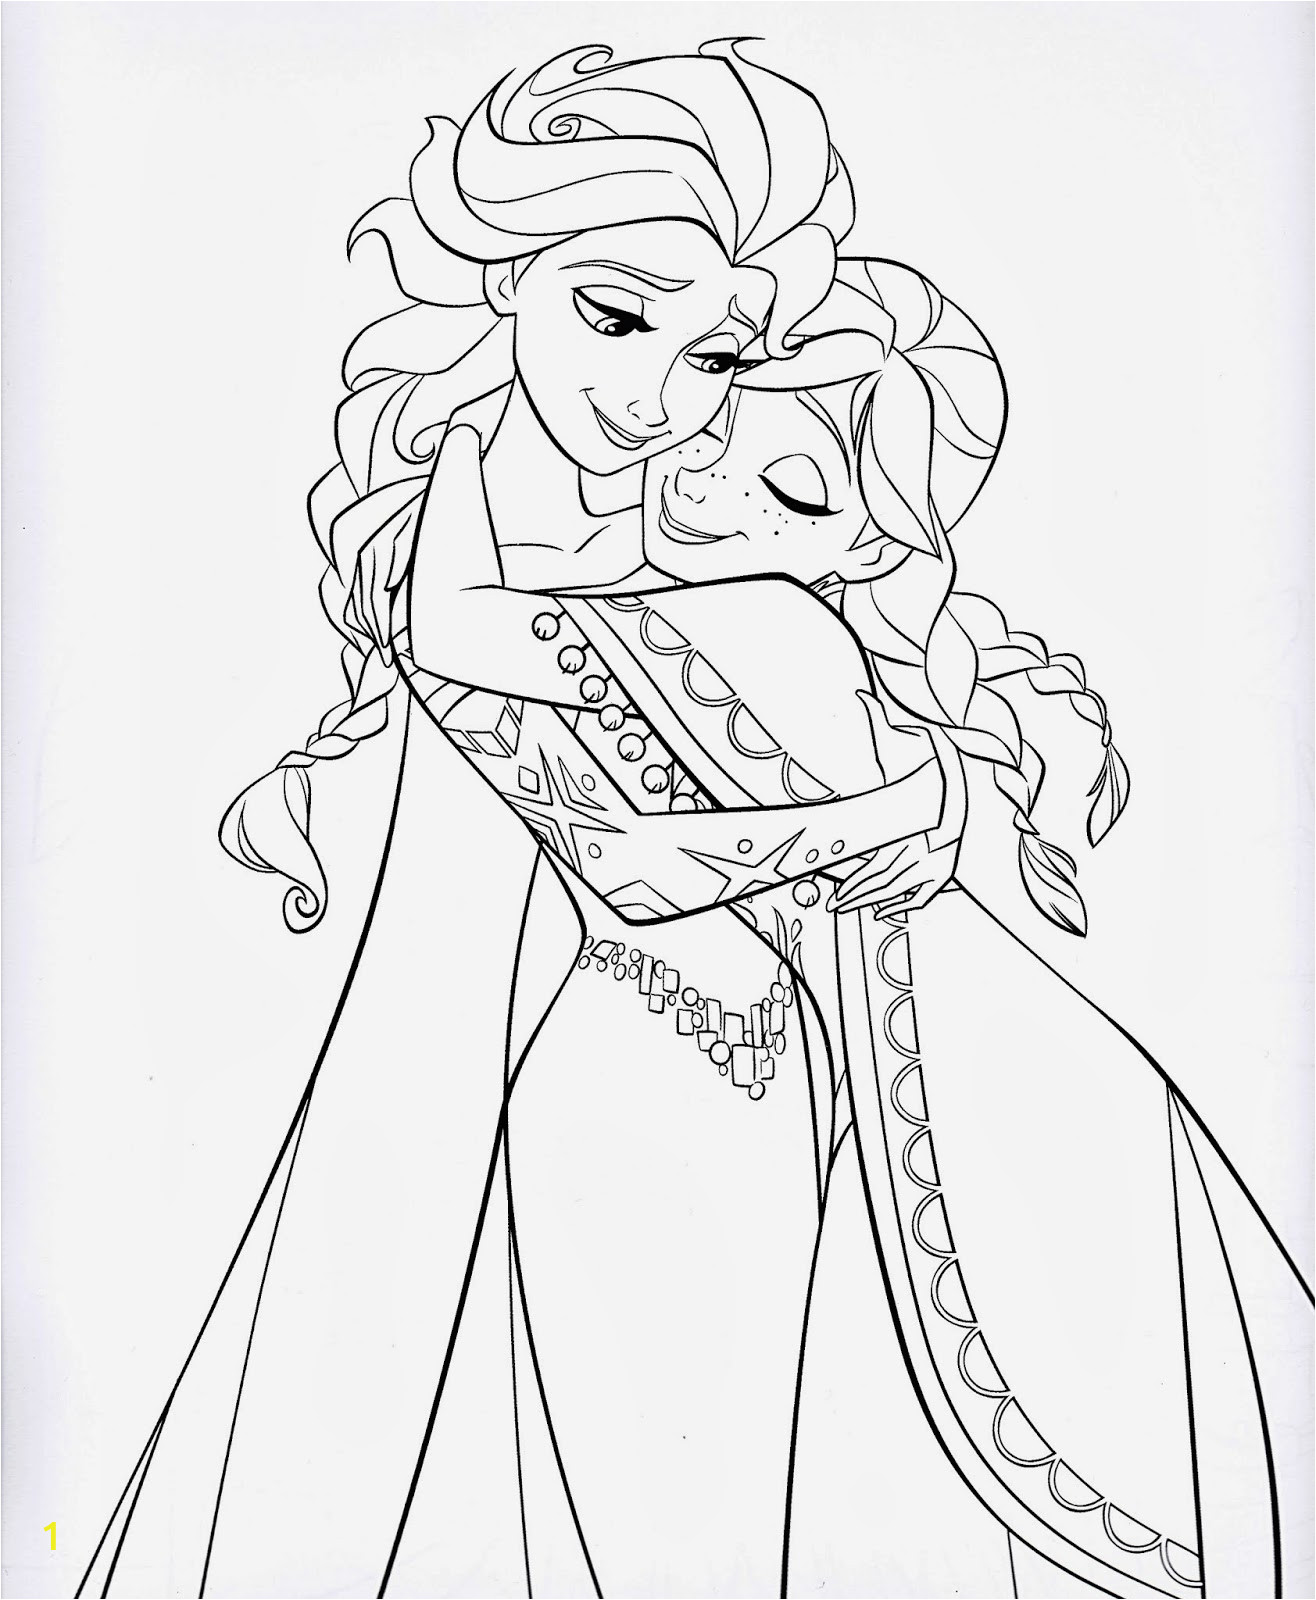 frozen printable coloring pages